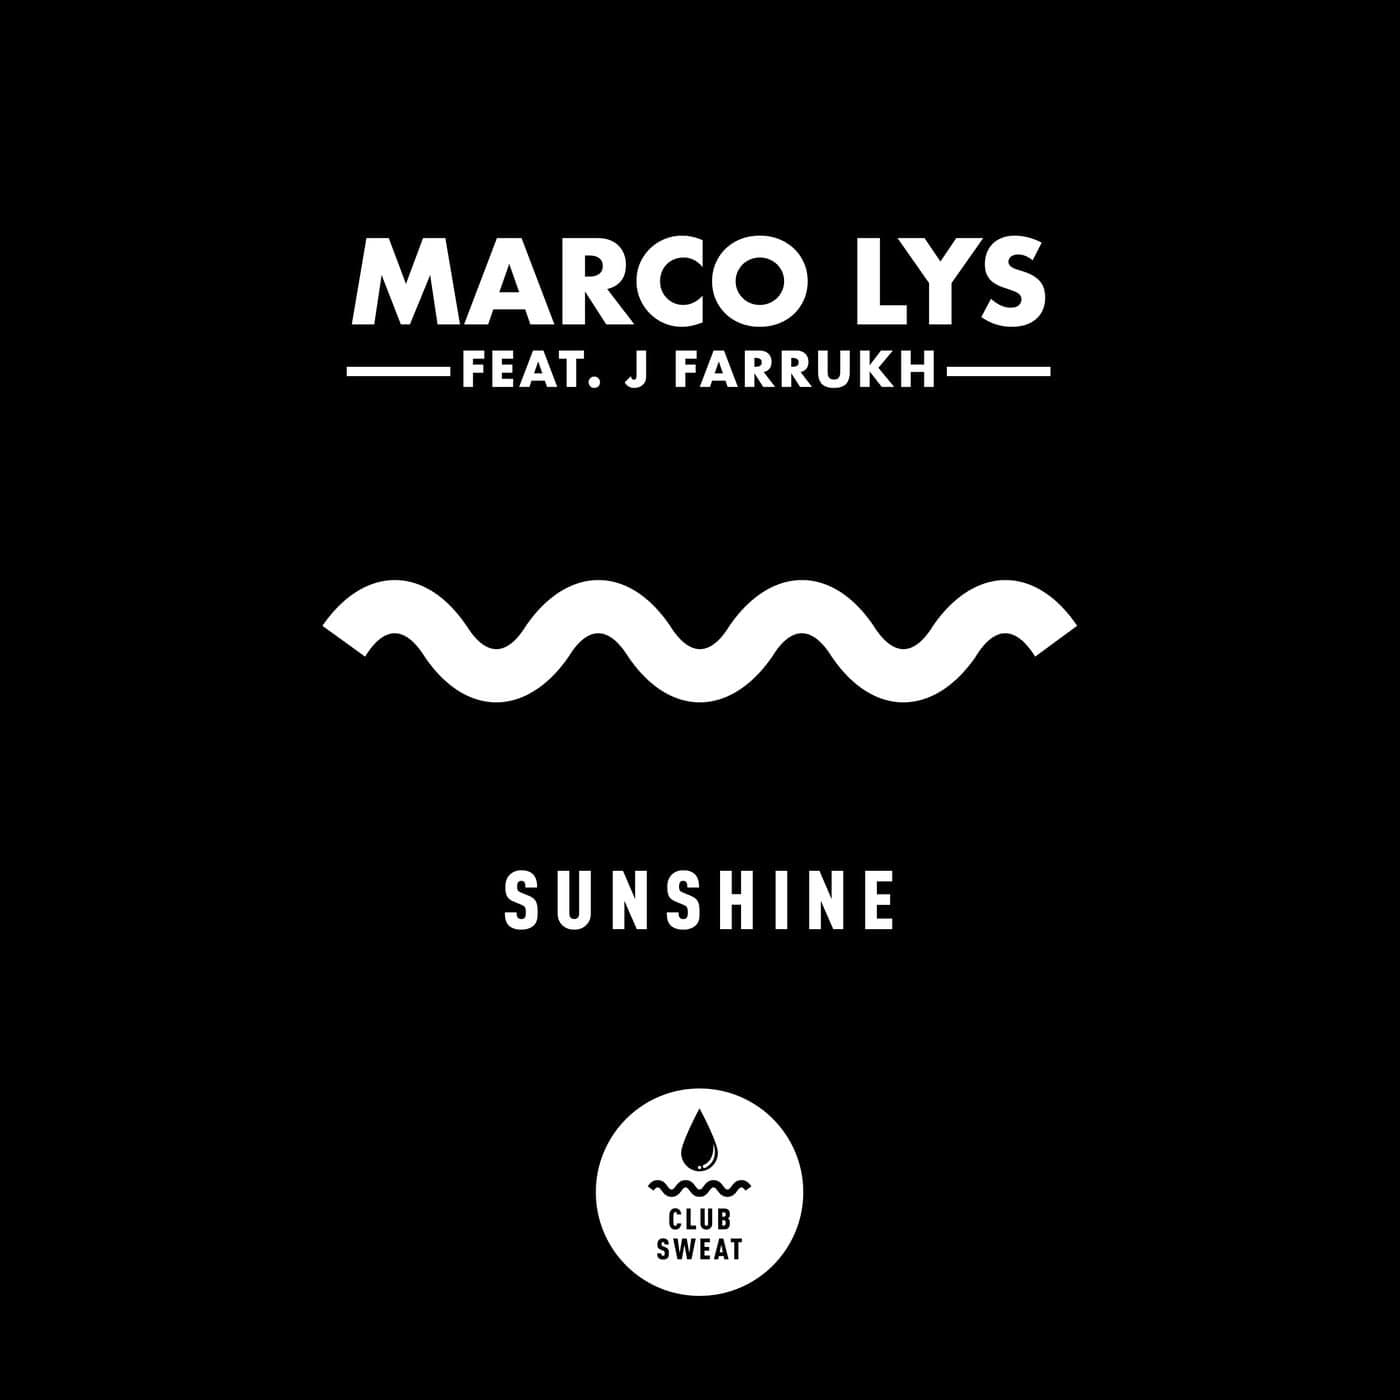 image cover: Marco Lys, J Farrukh - Sunshine (feat. J Farrukh) [Extended Mix] / CLUBSWE443